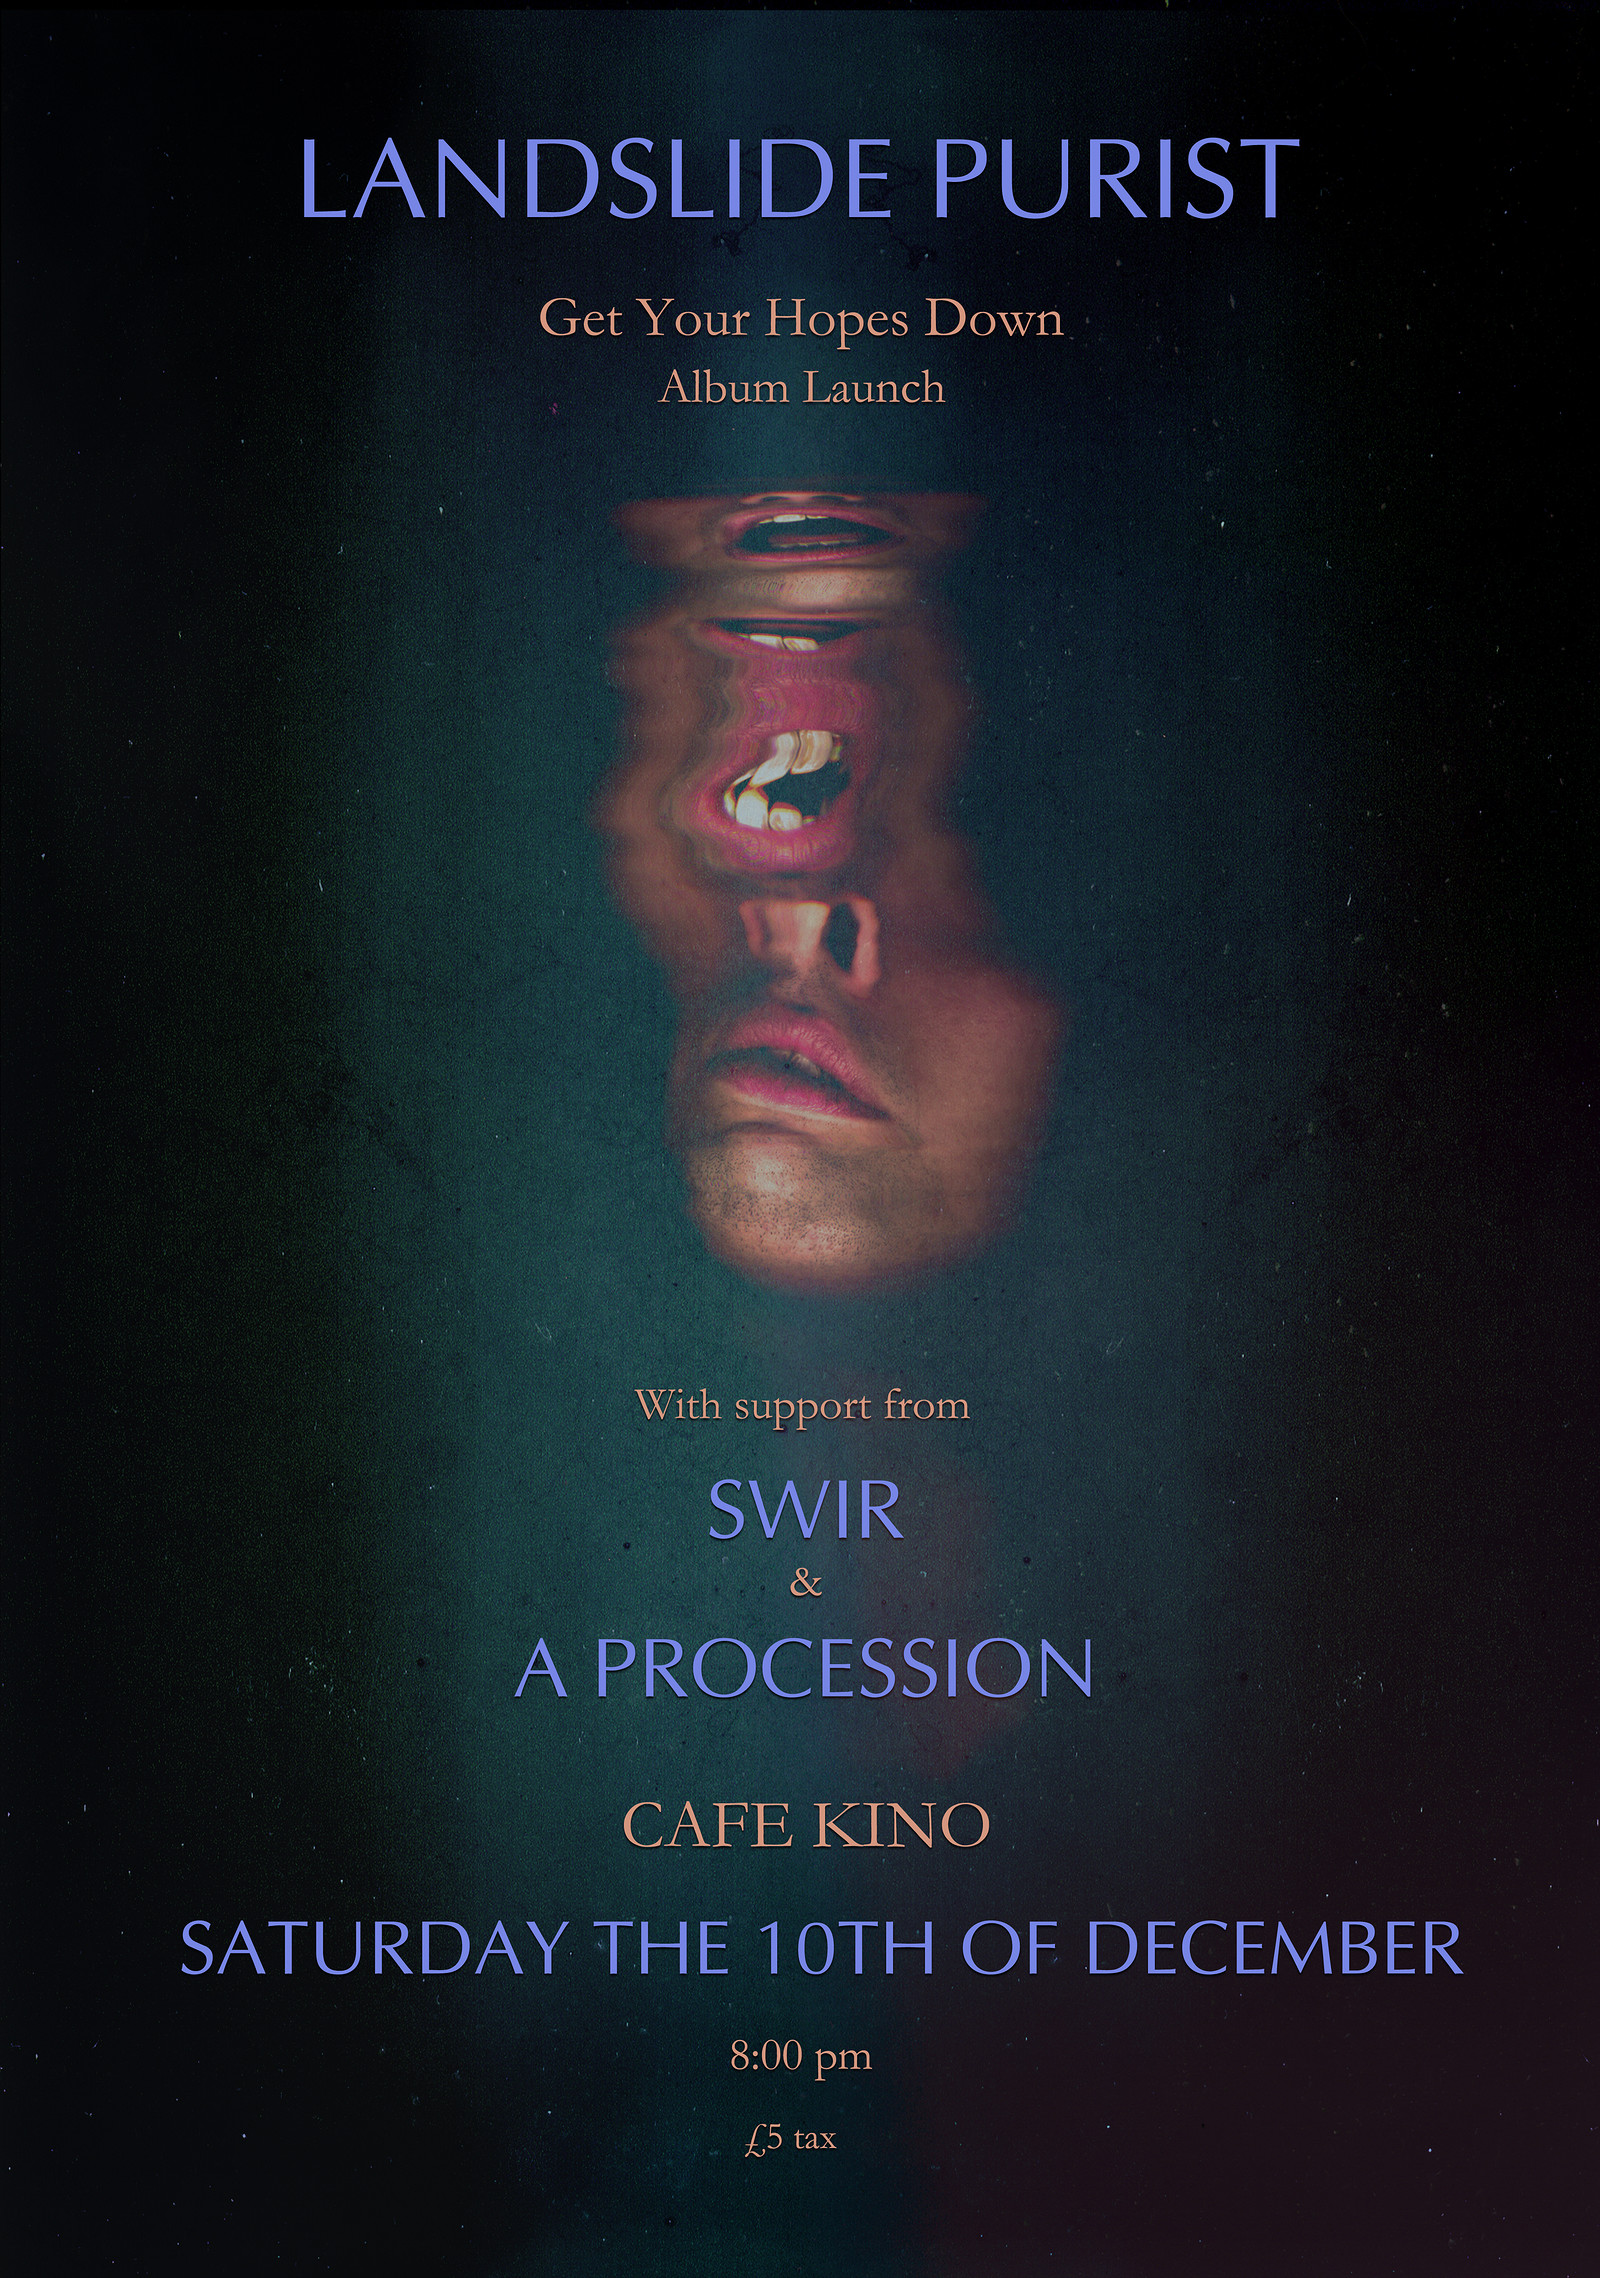 Landslide Purist / Swir / A Procession at Cafe Kino